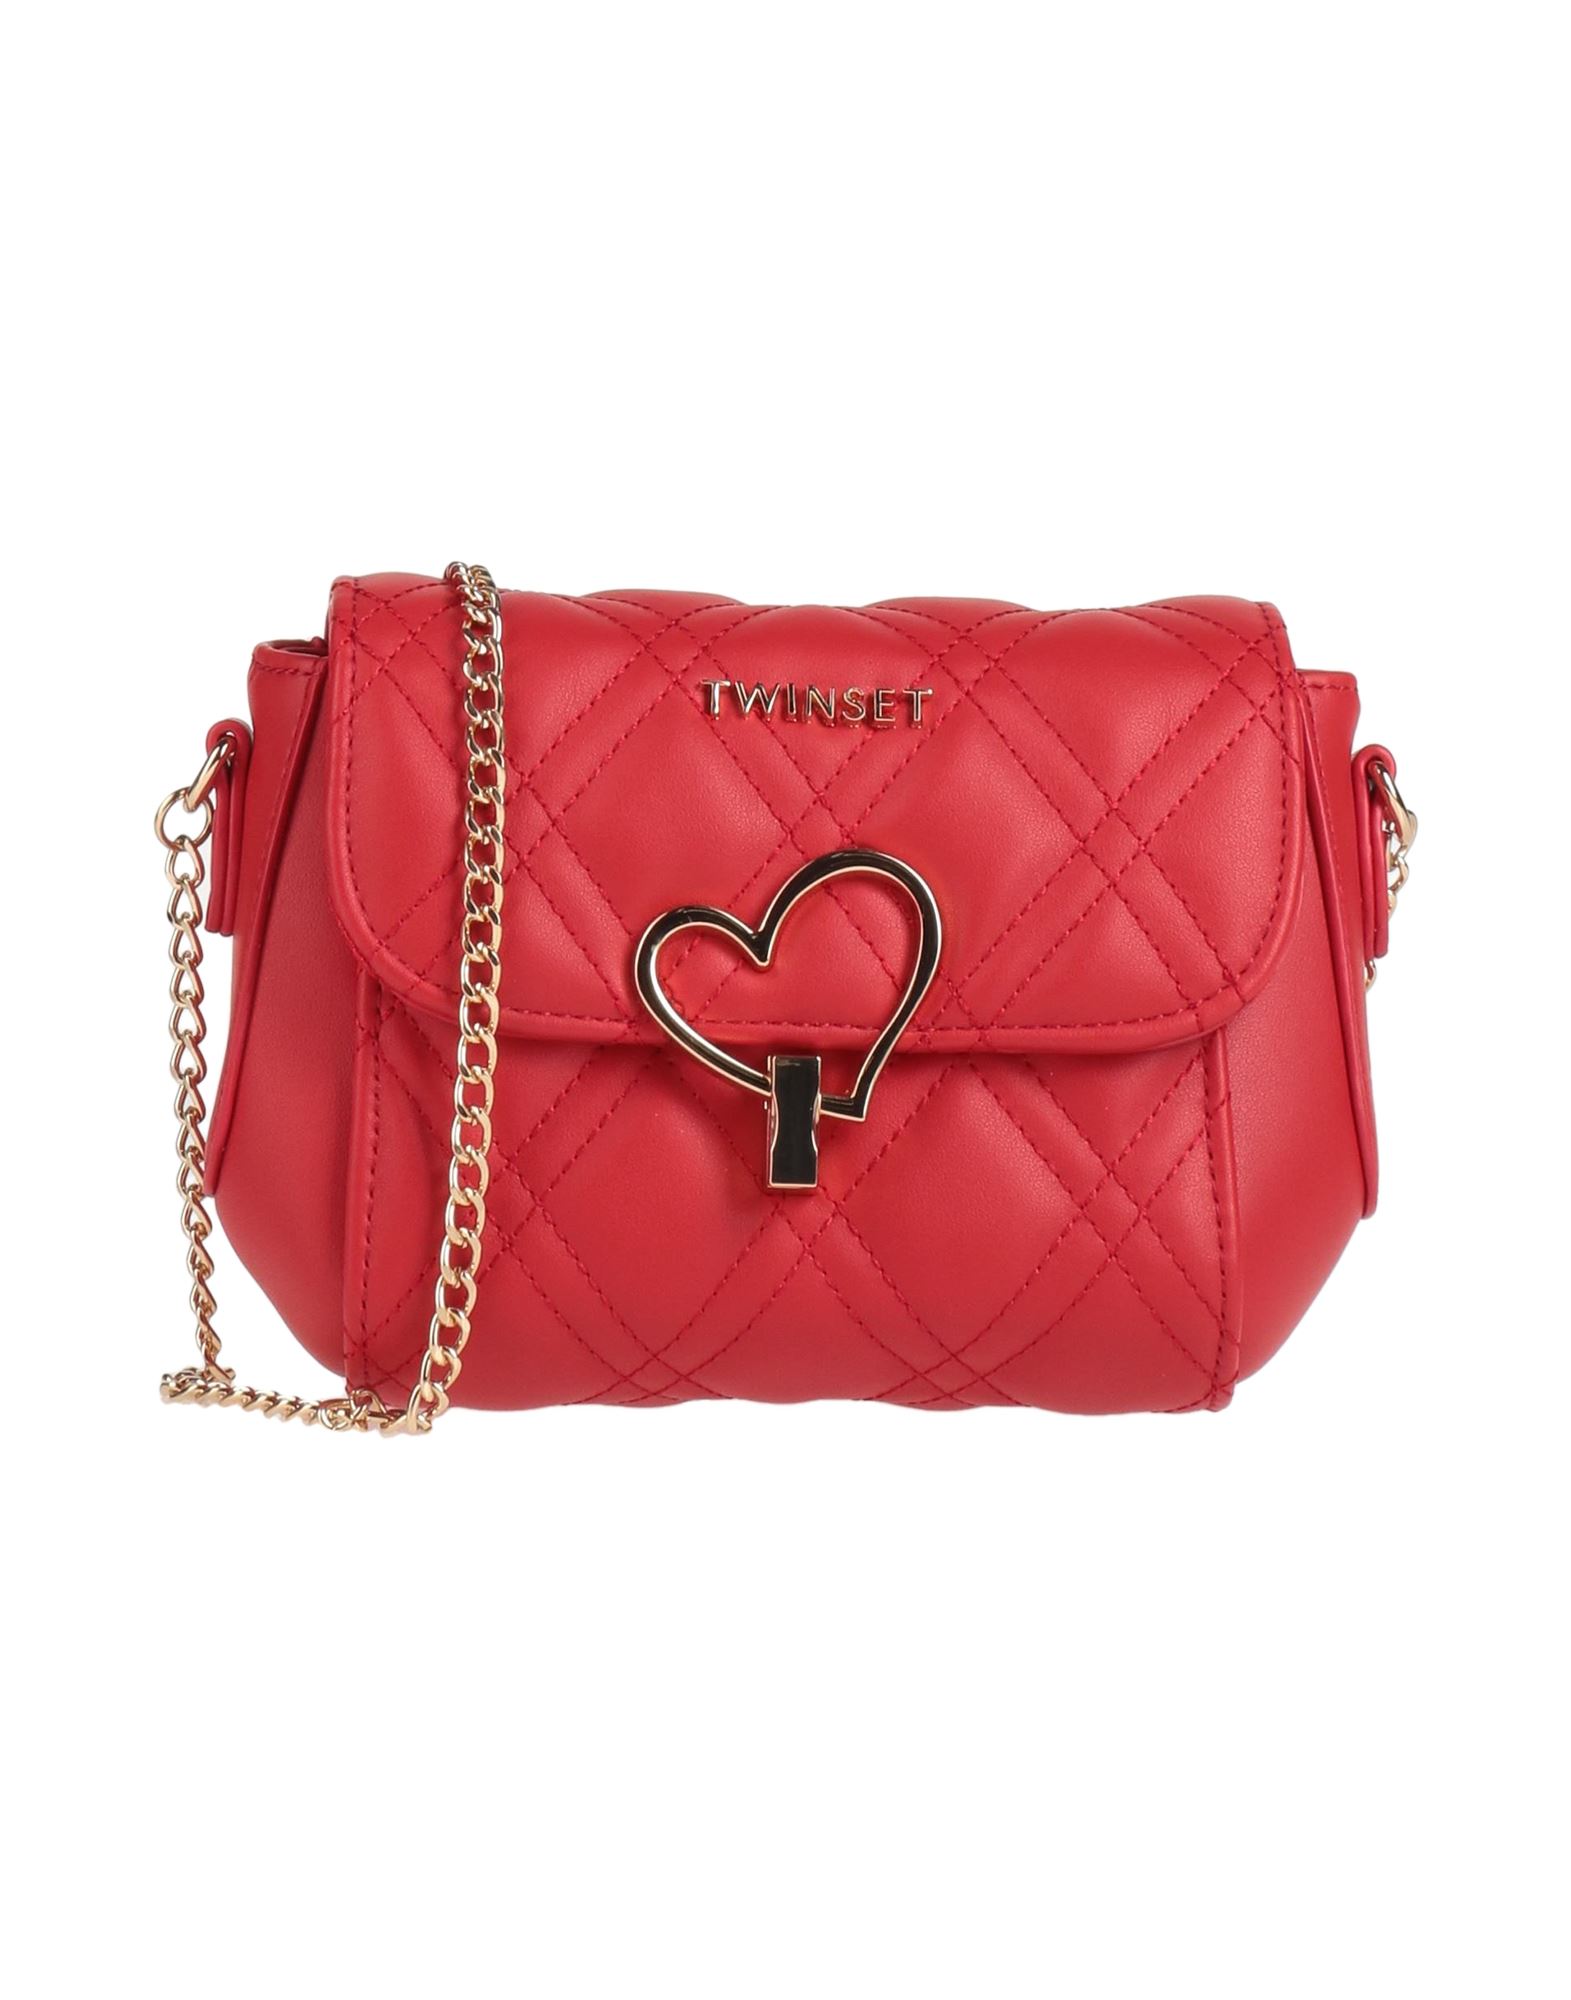 Twinset Handbags In Red